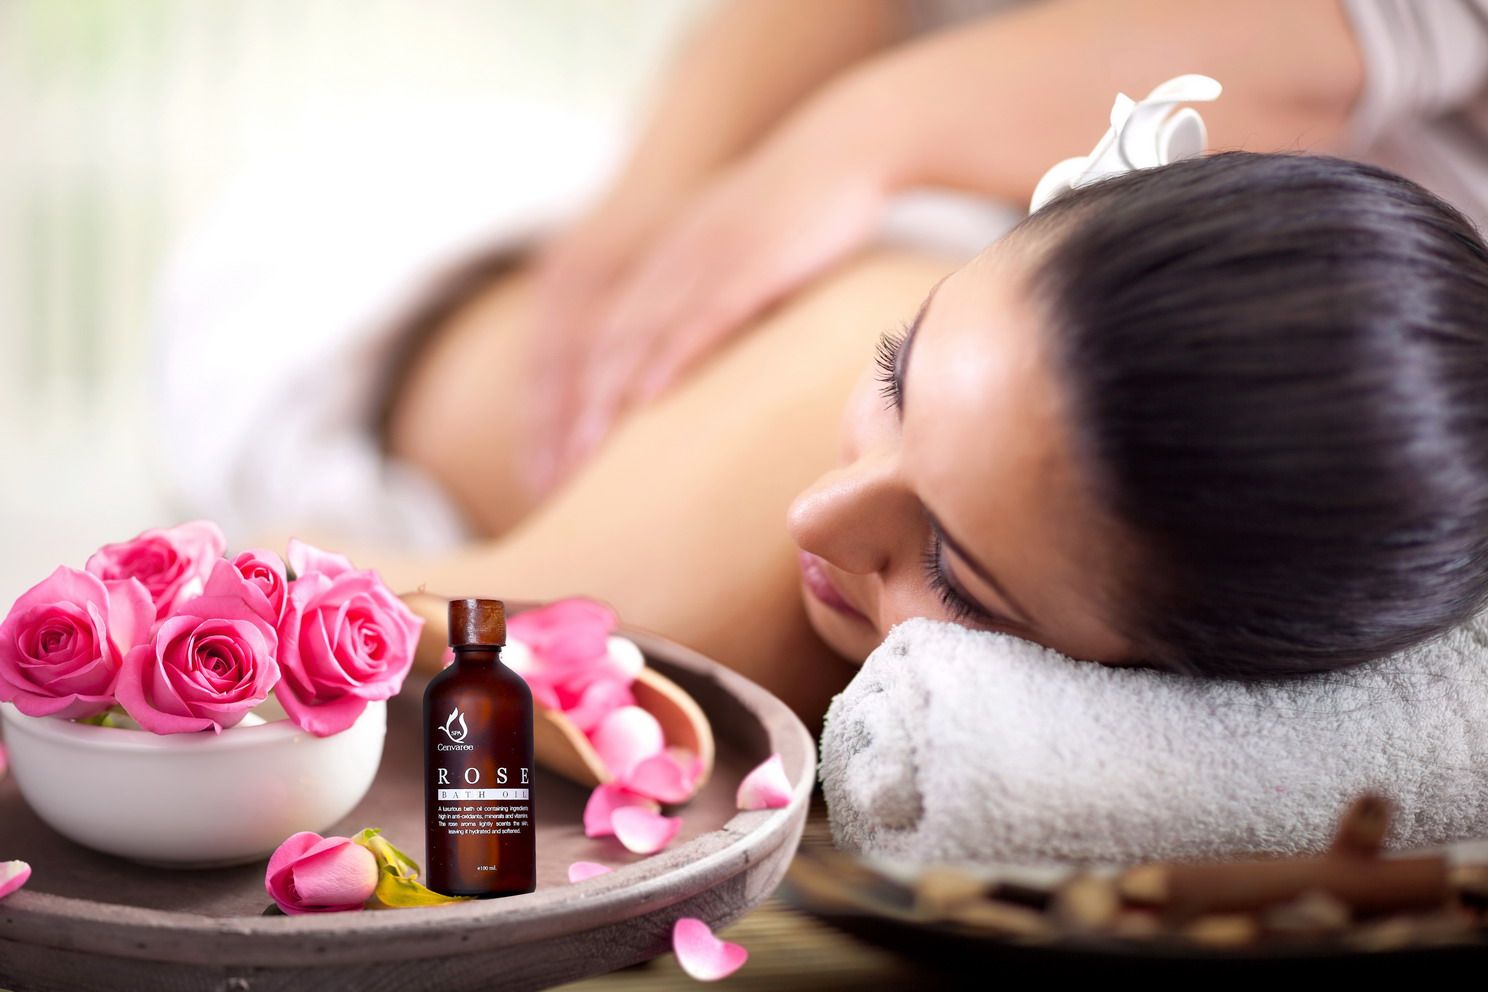 2. FLORAL BLISS FOR FLAWLESS BEAUTY AT SPA CENVAREE 1